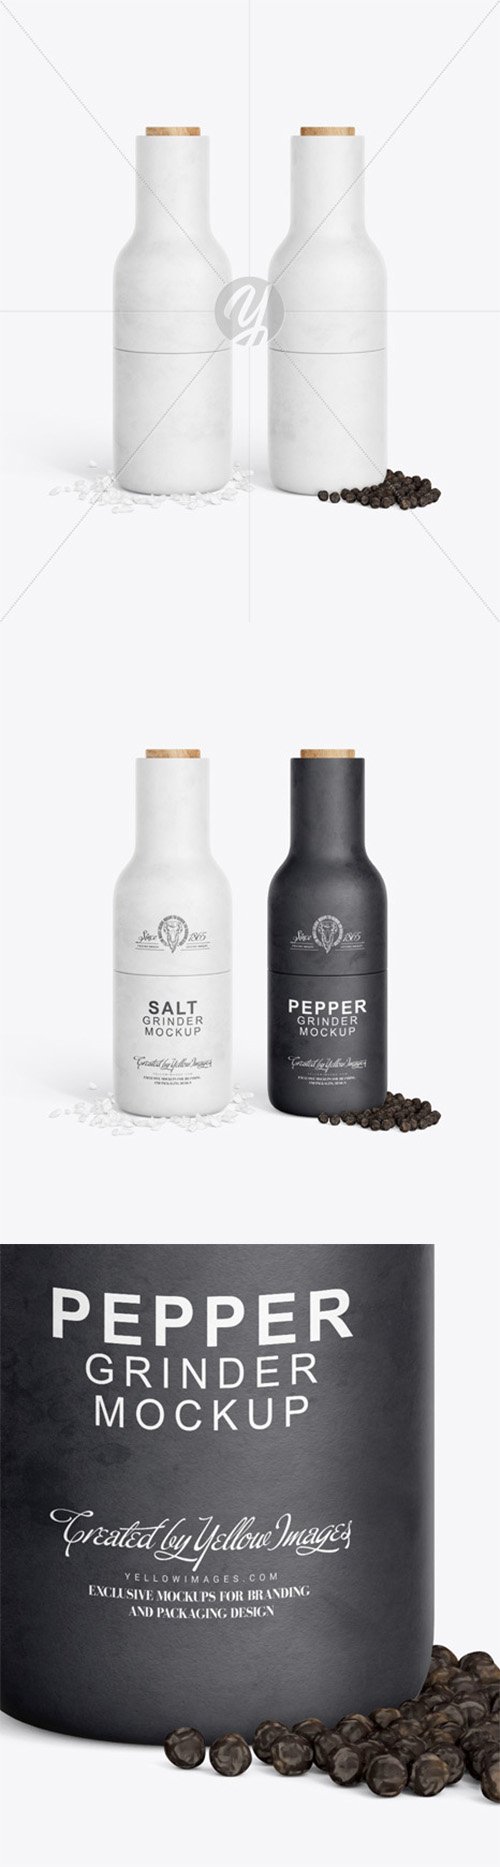 Two Grinders with Salt & Pepper Mockup 62427